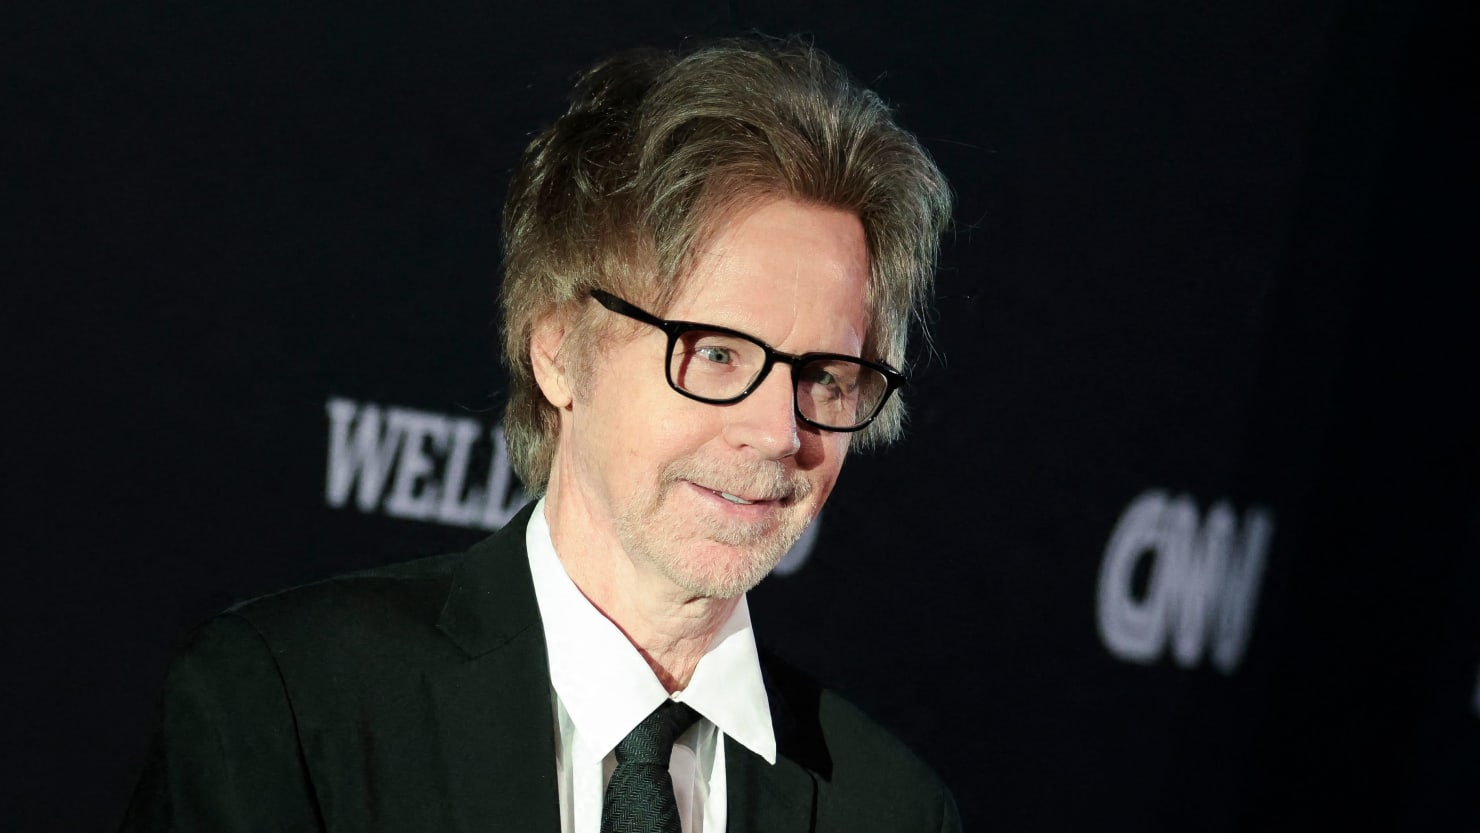 Saturday Night Live Pays Tribute To Dana Carvey And Wife After Tragic Loss Of Son To Drug